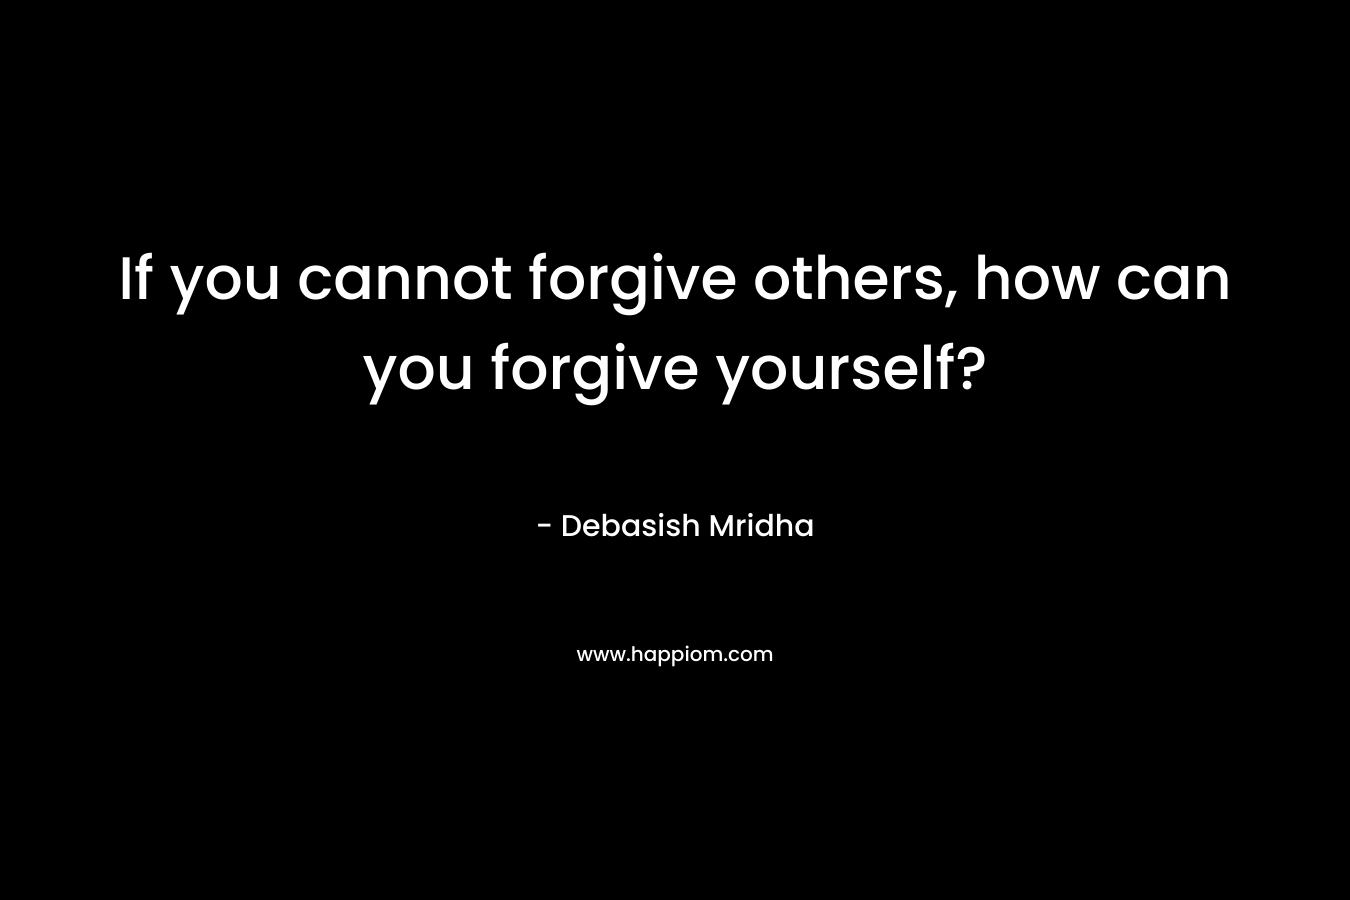 If you cannot forgive others, how can you forgive yourself?